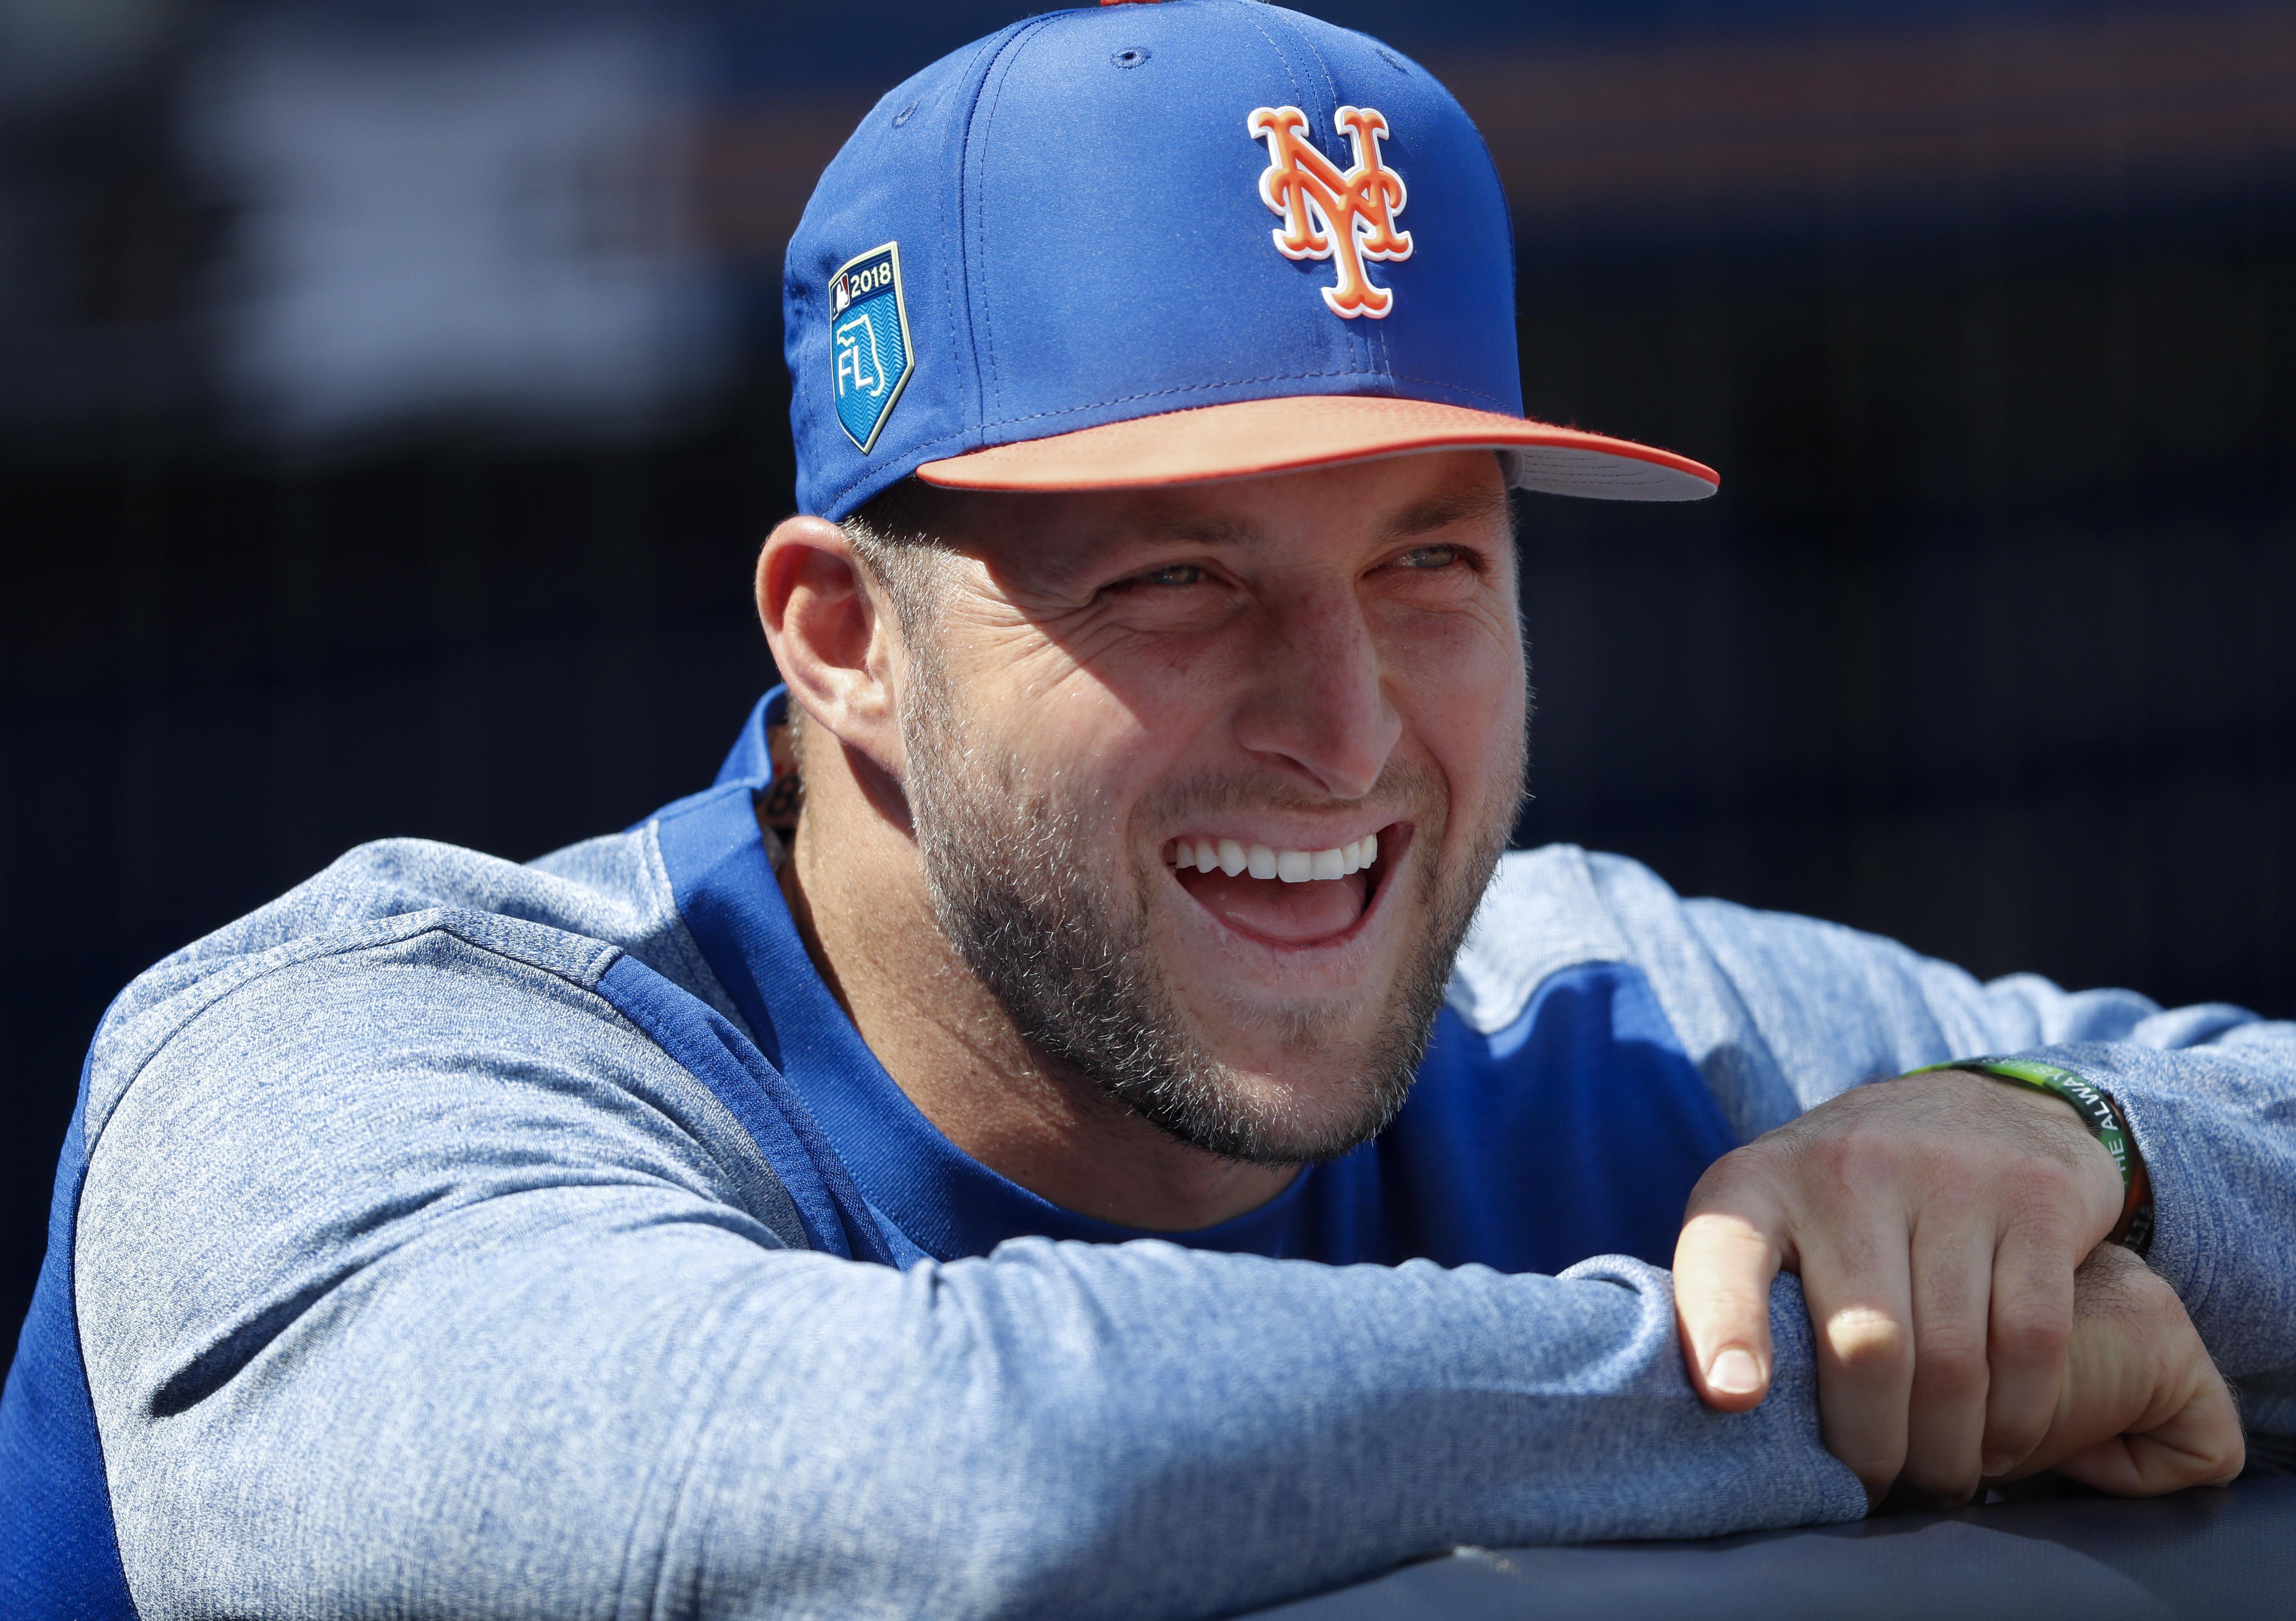 PHOTOS: Tim Tebow and Rumble Ponies take on the Trenton Thunder